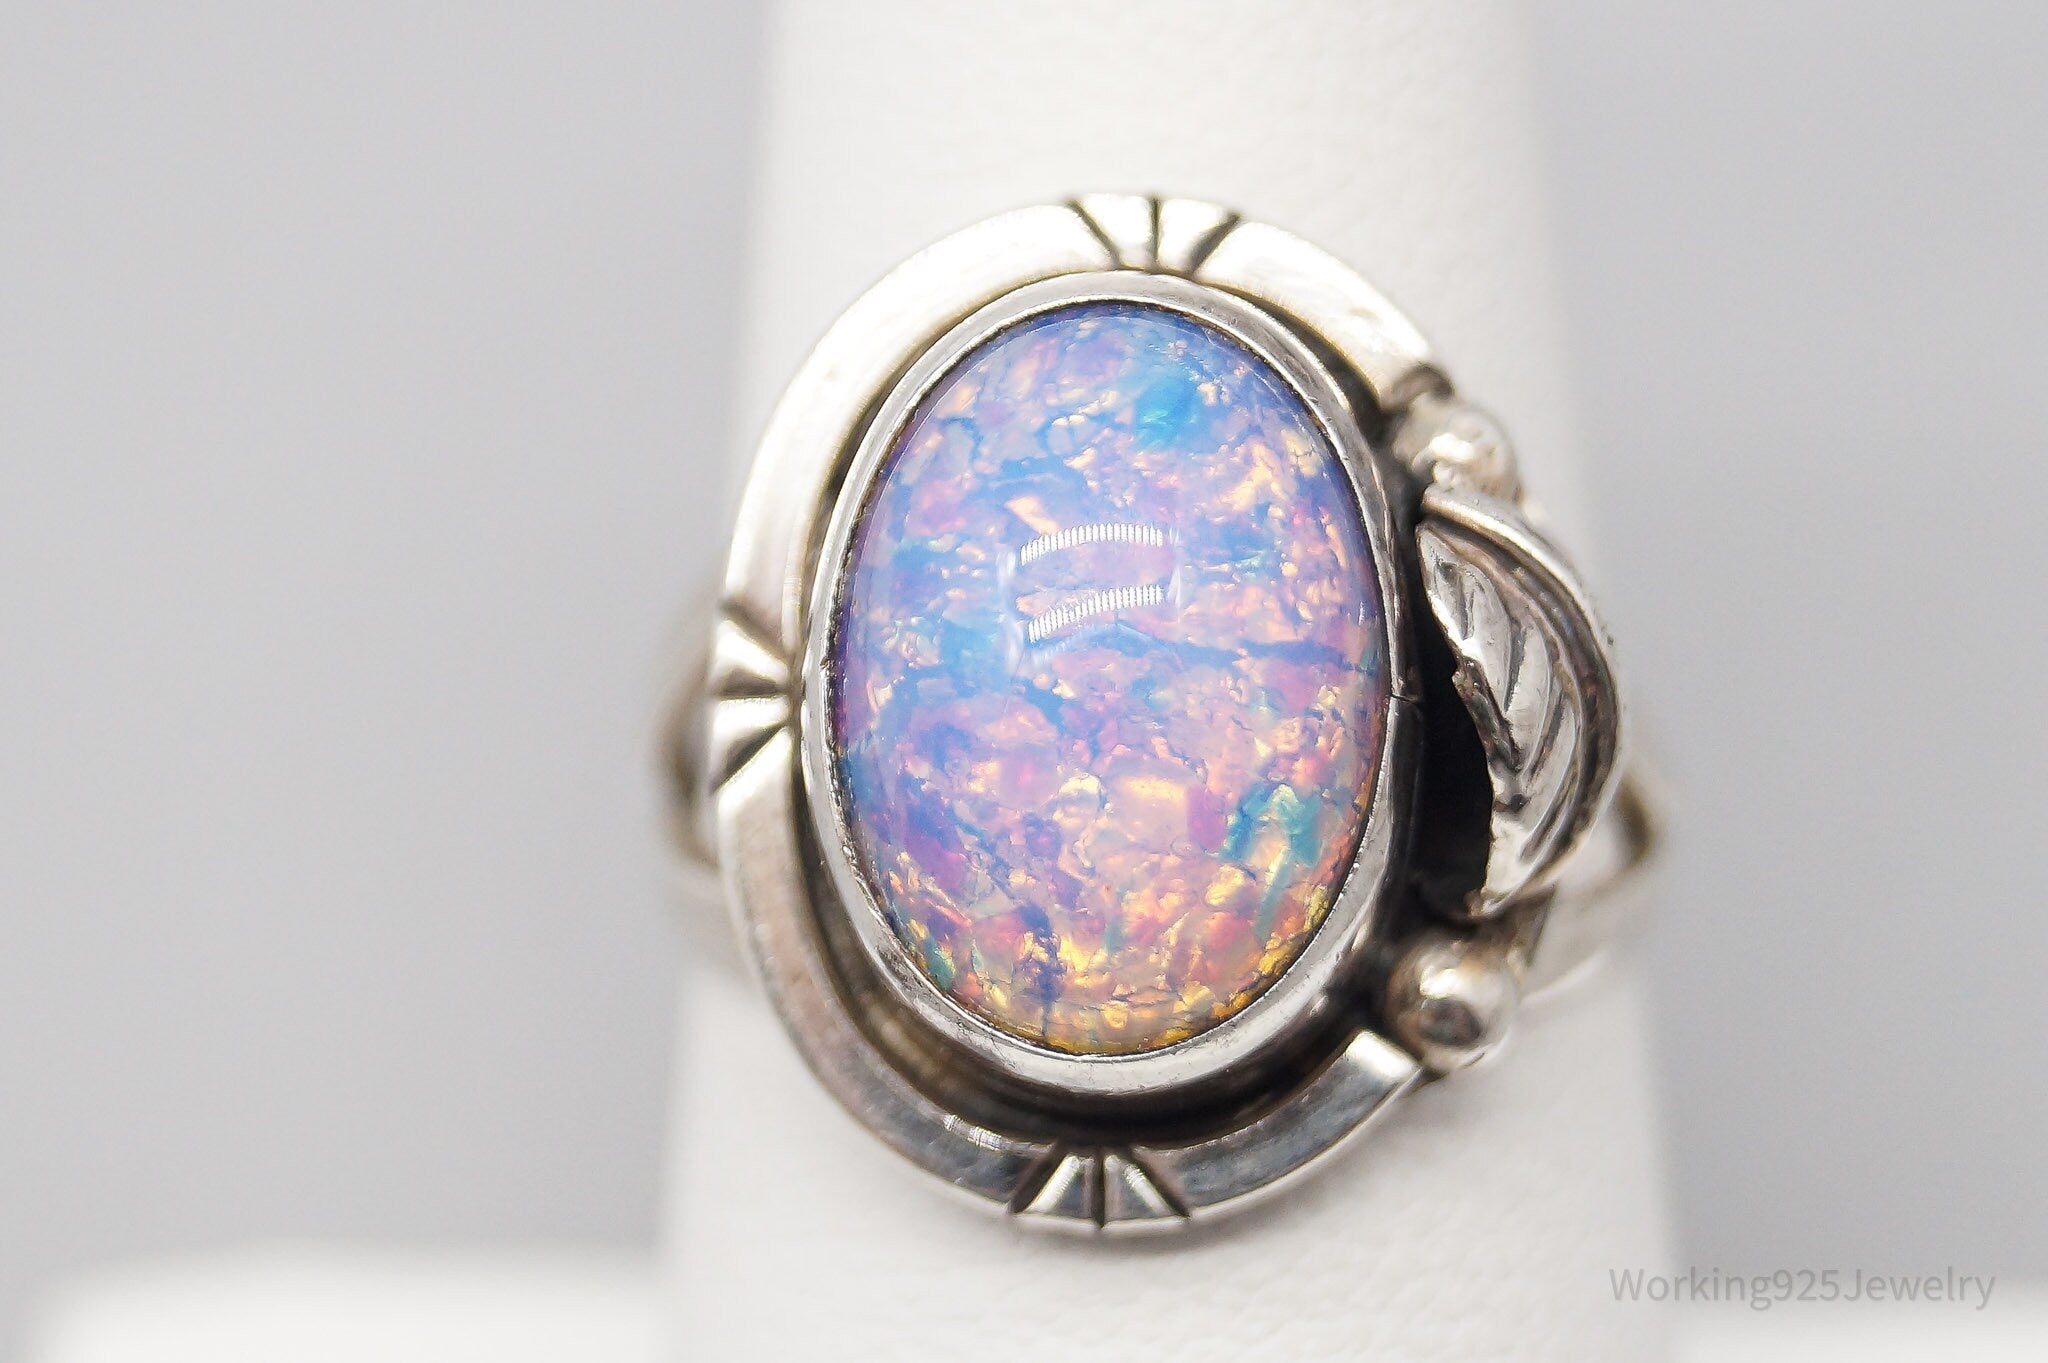 Vintage Mexico Faux Opal Sterling Silver Ring - Size 7.5